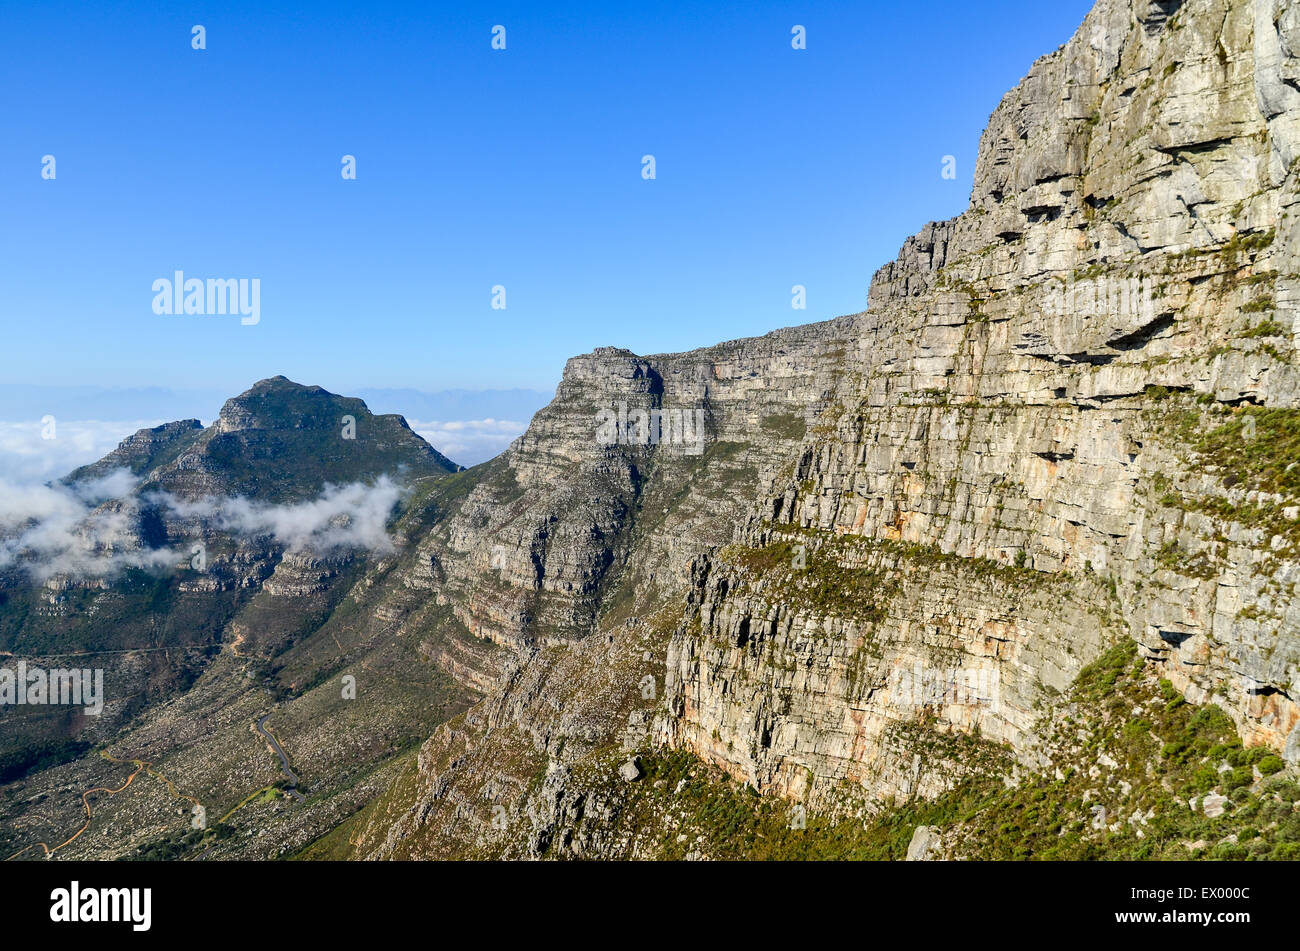 Aerial view of Devil's Peak on Table mountain from the India Venster route on Table Mountain, Cape Town Stock Photo